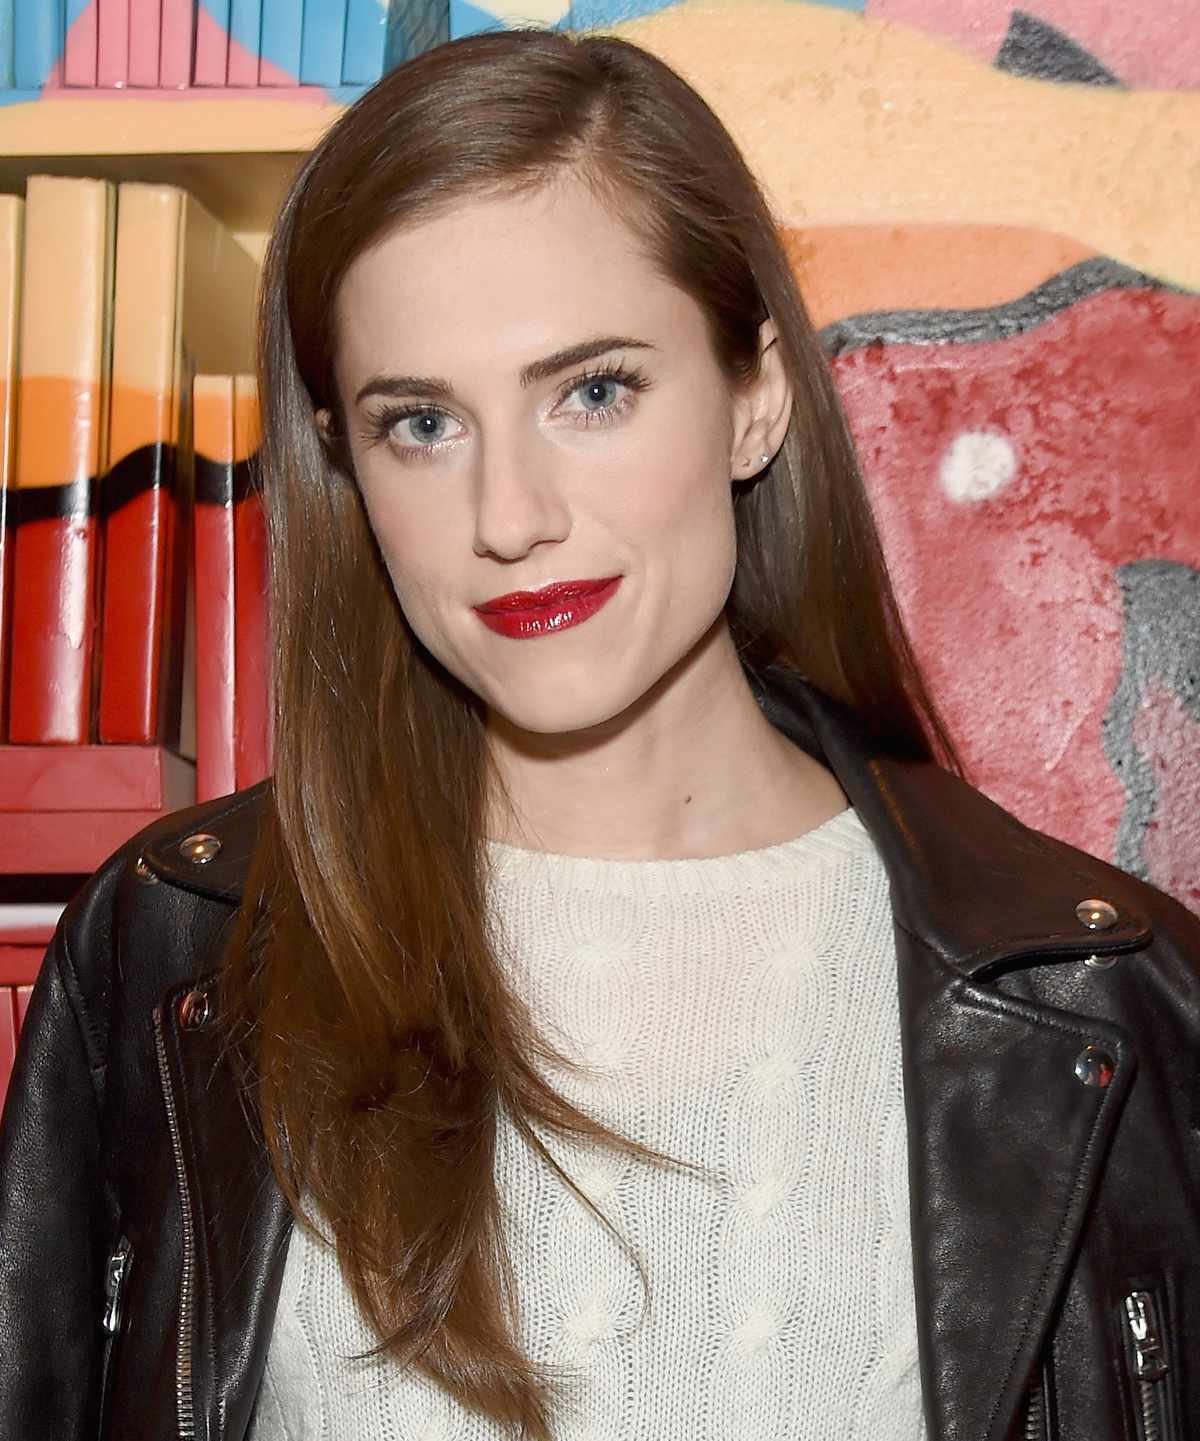 Actress Allison Williams attends the VANDAL Grand Opening in New York City on January 15, 2016 in New York City.